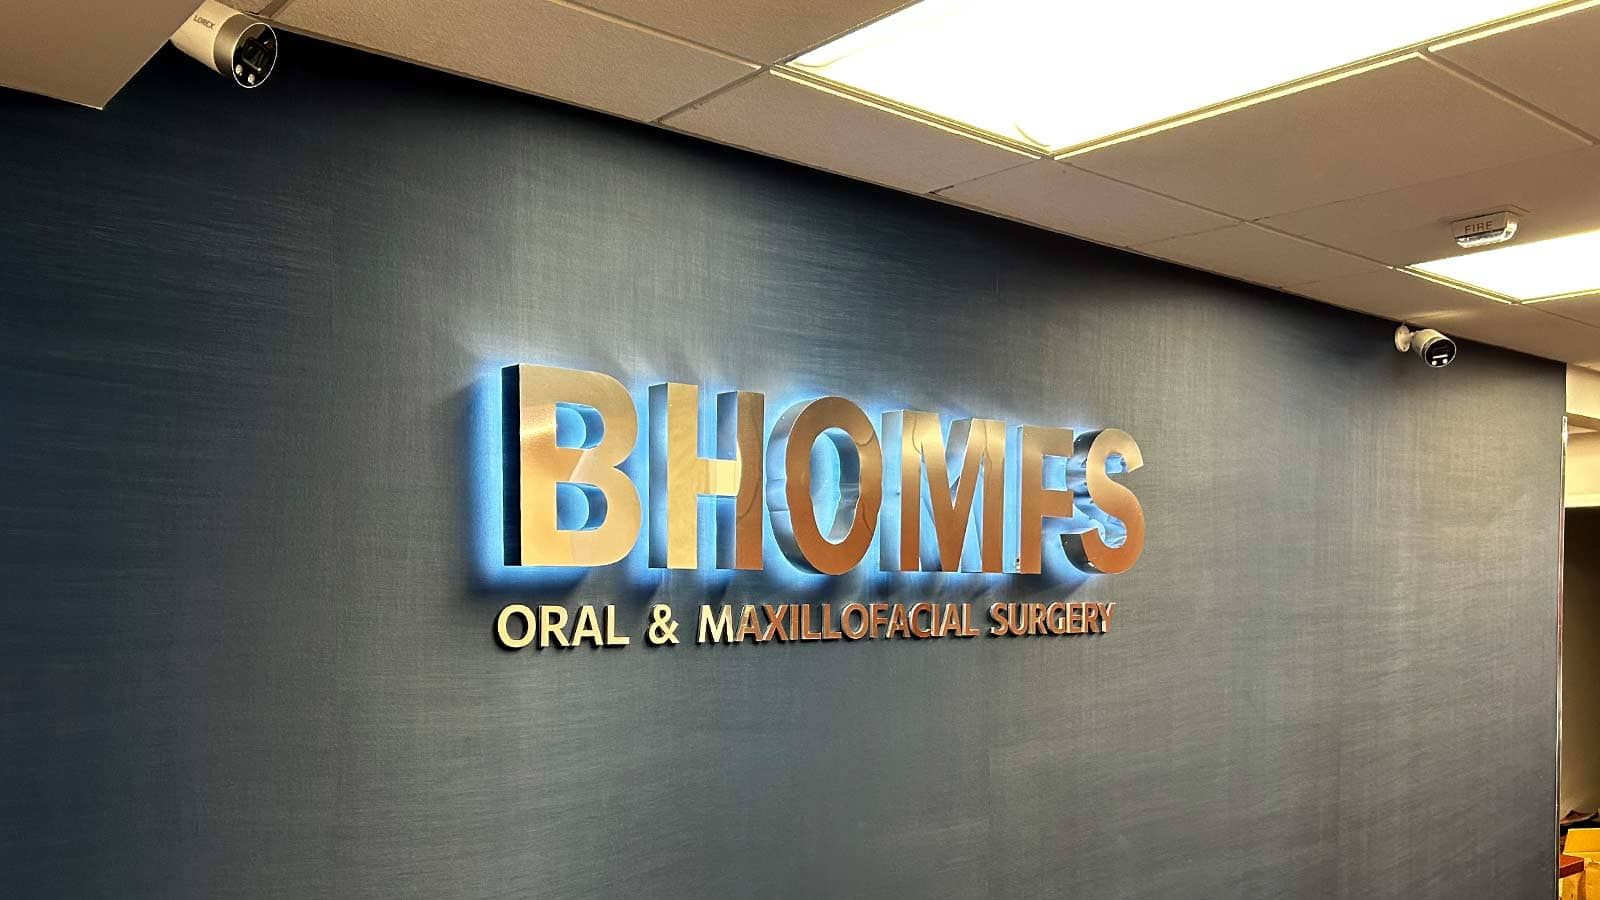 BHOMFS lobby sign installed on the wall